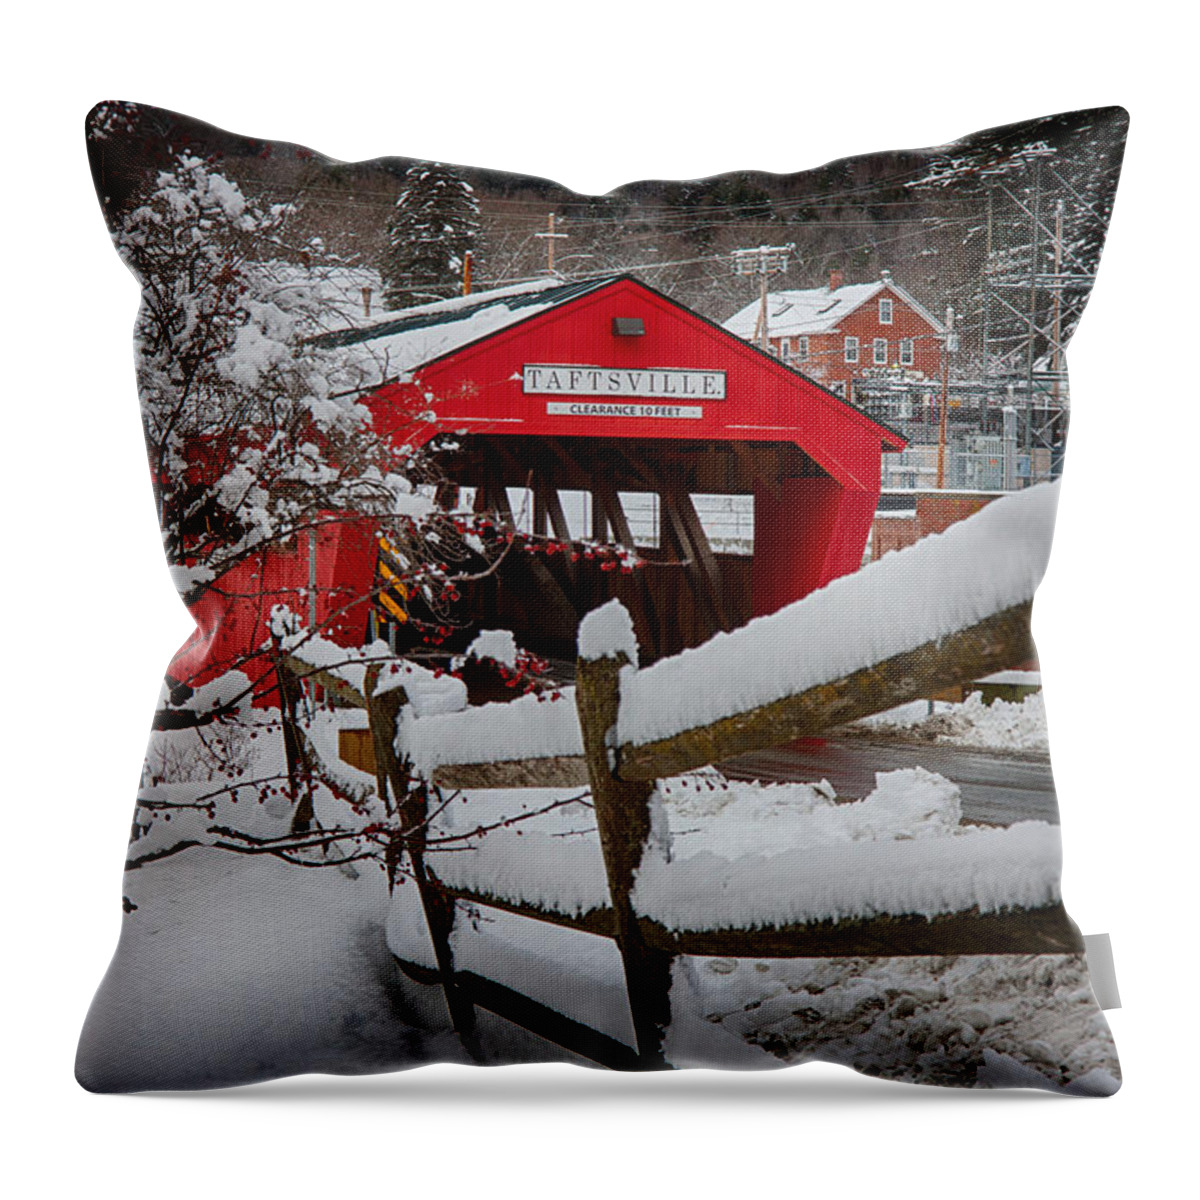 New England Covered Bridge Throw Pillow featuring the photograph Taftsville Covered Bridge by Jeff Folger